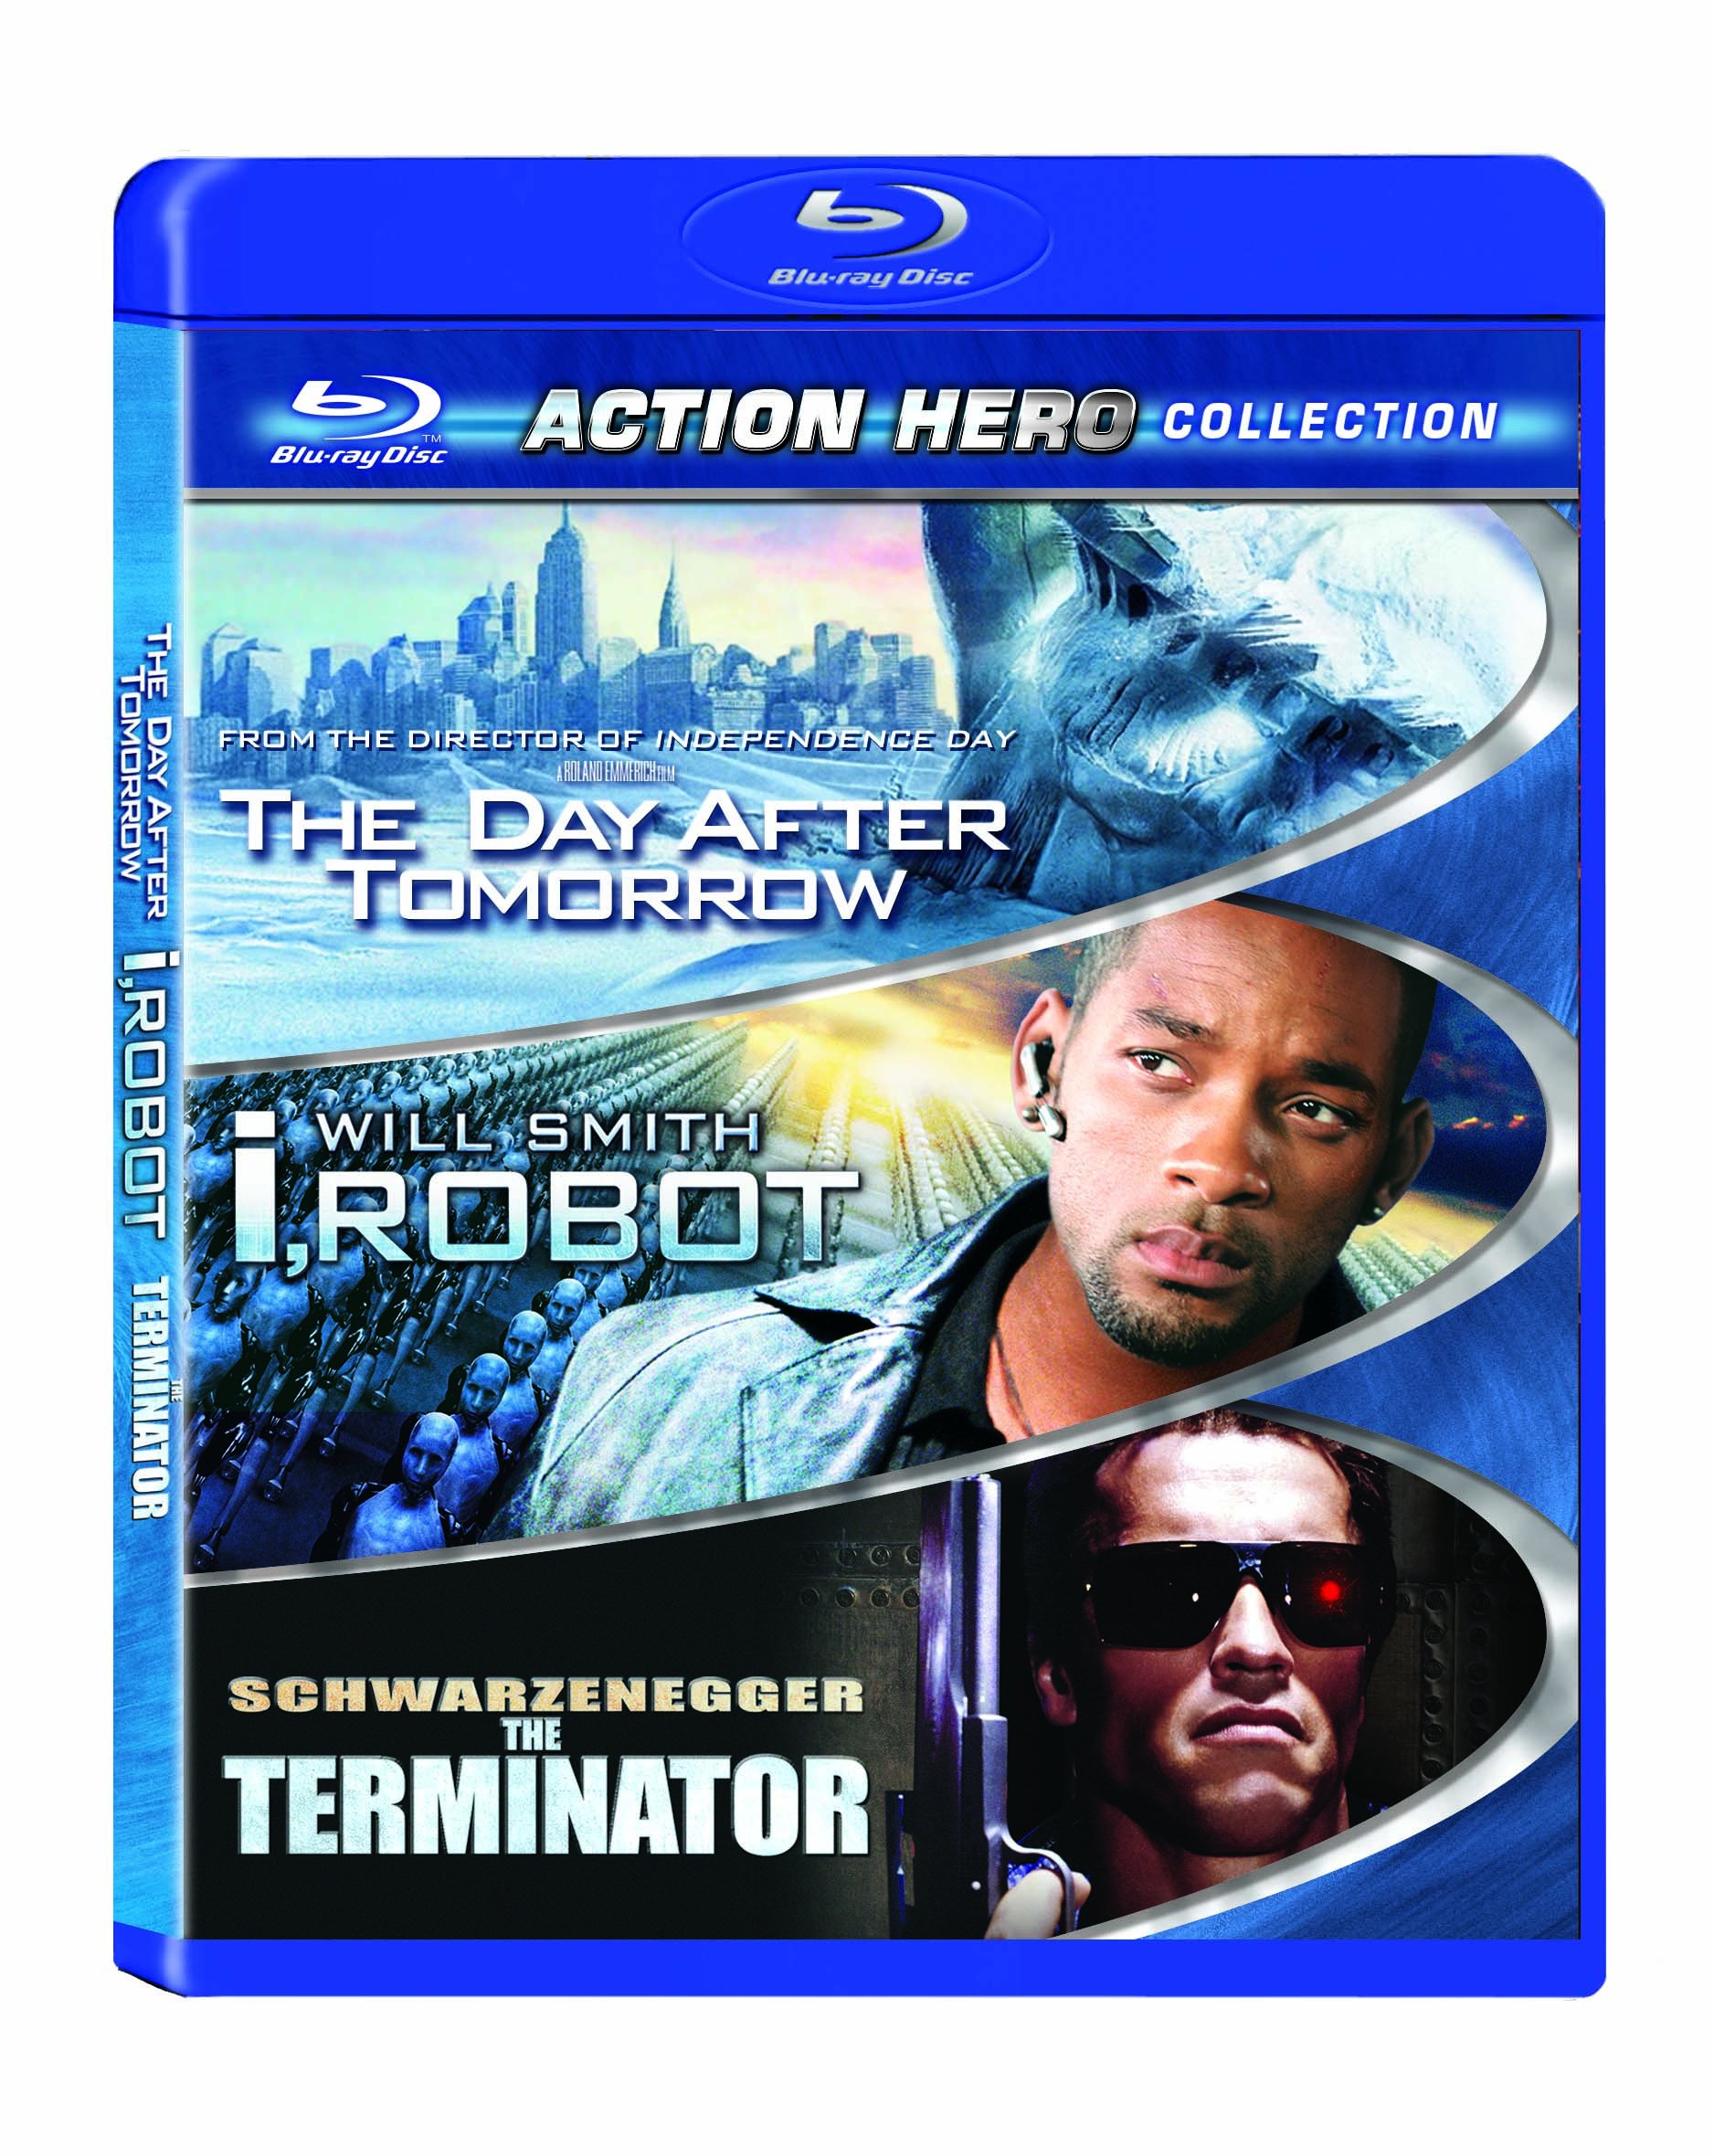 action-hero-collection-3-movies-the-day-after-tomorrow-irobot-the-terminator-3-disc-box-set